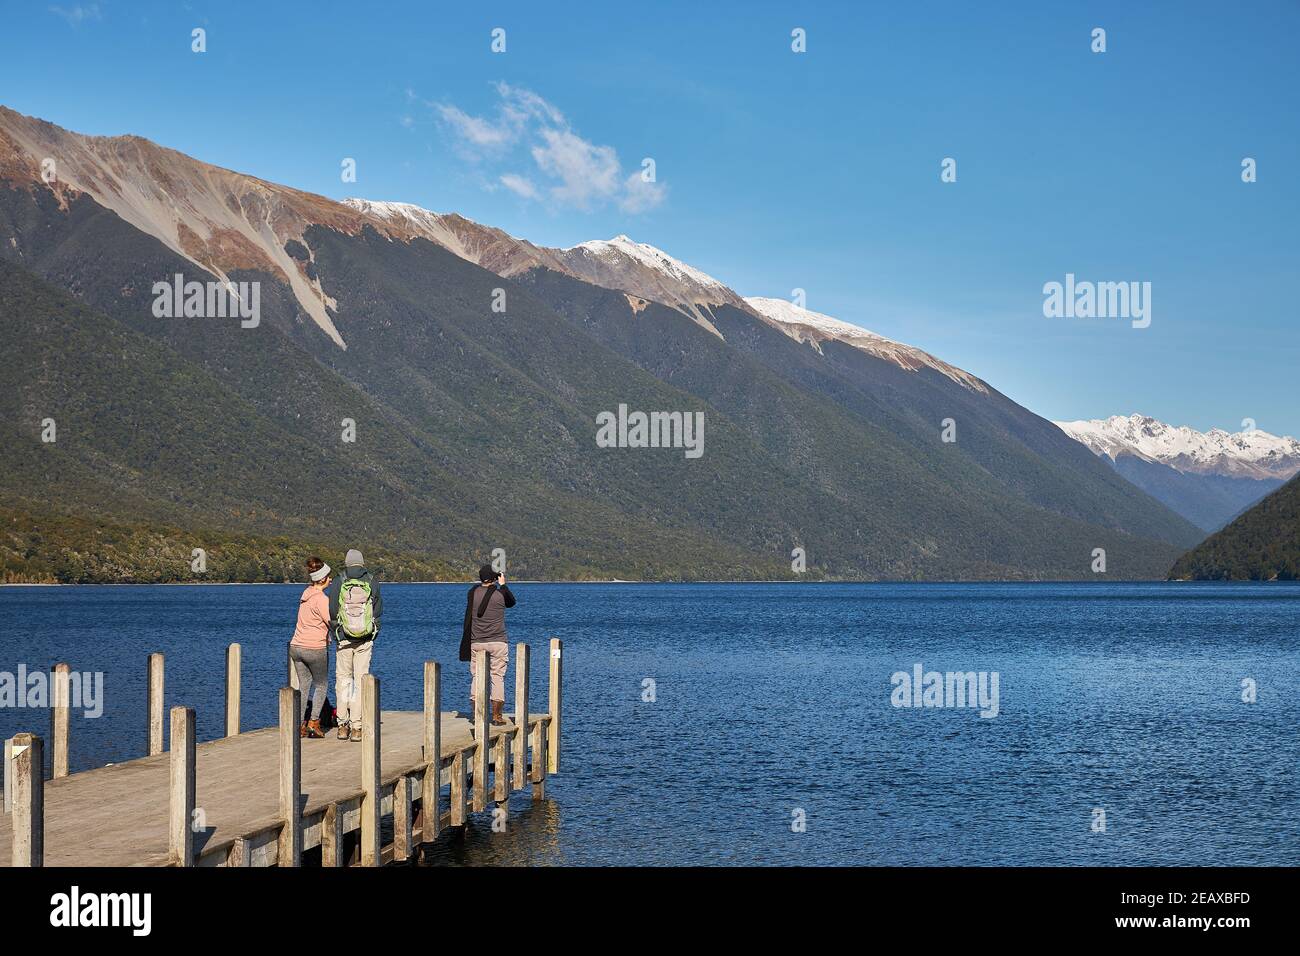 Photo opportunity at Lake Rotoiti in Nelson Lakes National Park in the Tasman District of New Zealand's South Island Stock Photo